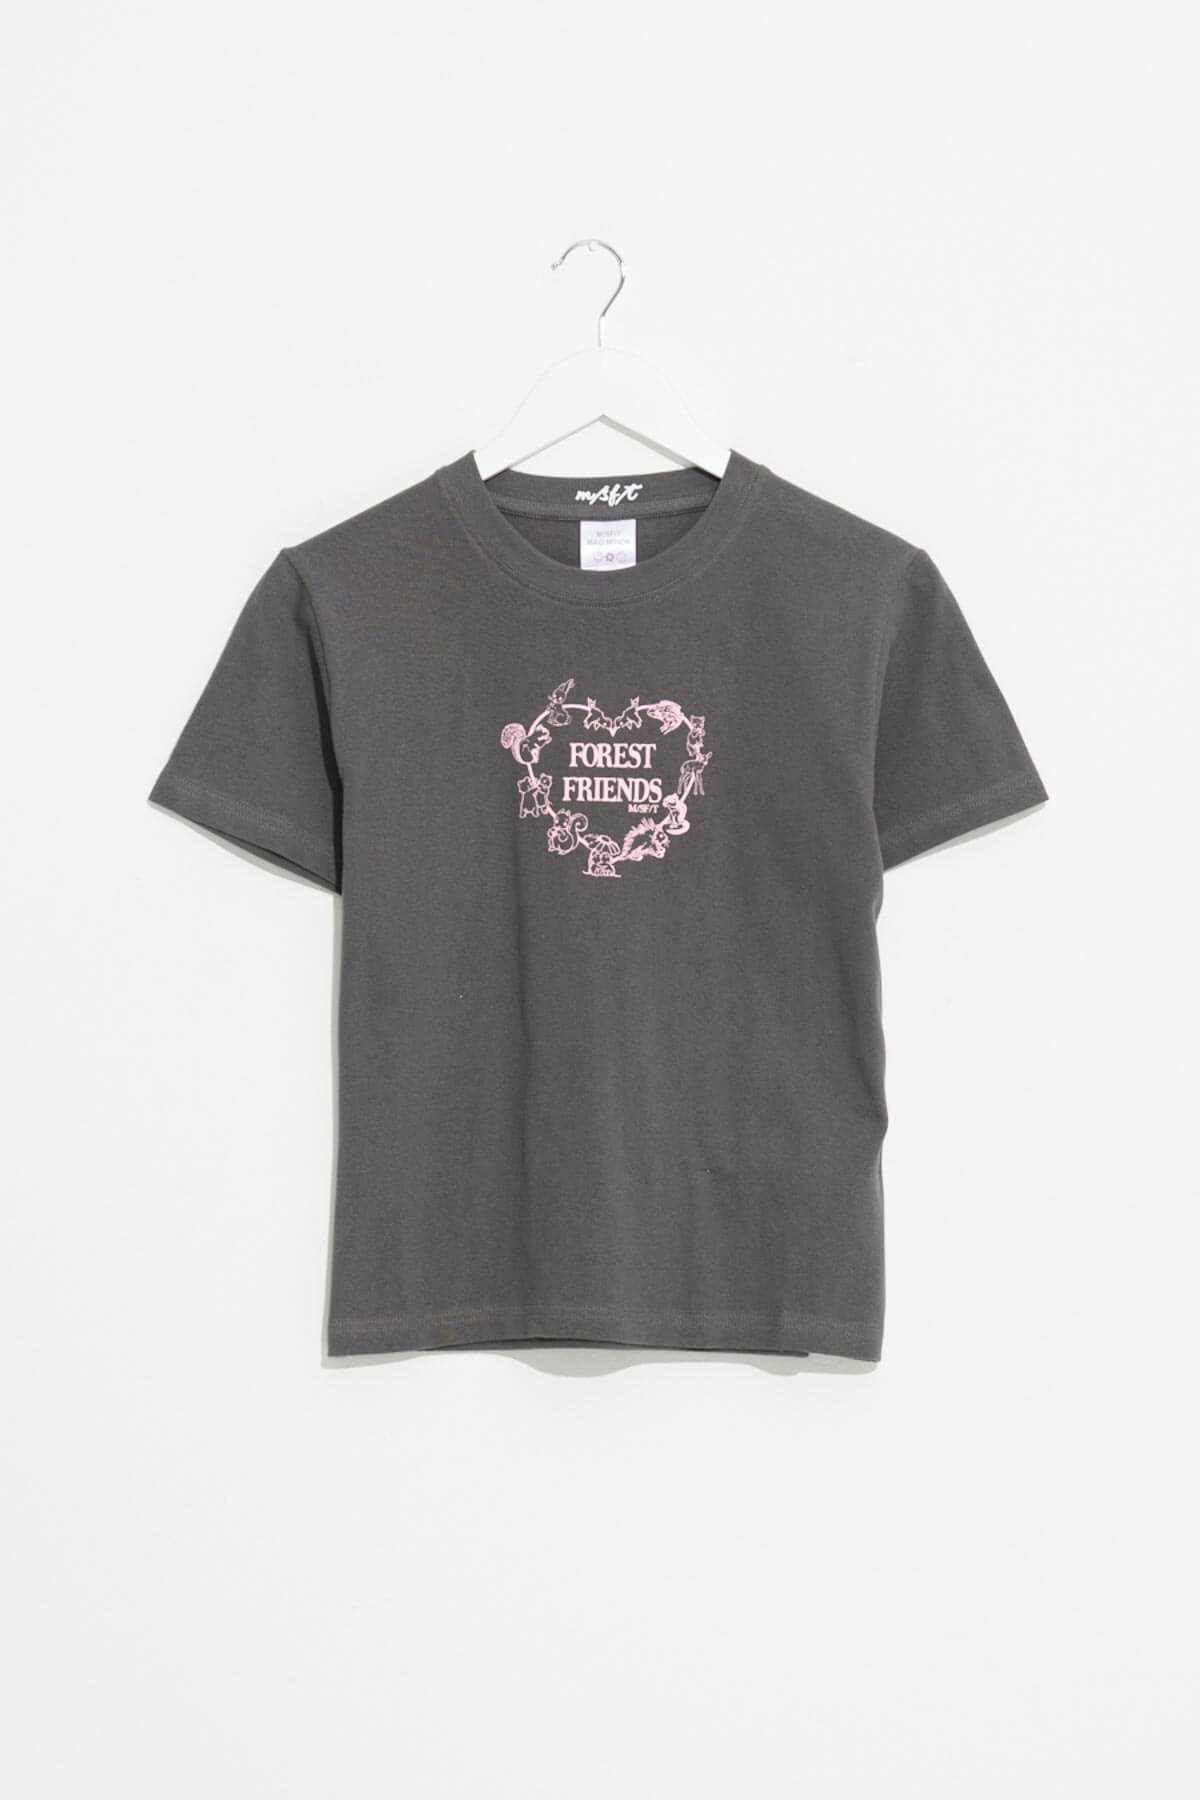 Misfit Shapes - Forest Friends Baby Tee - Charcoal